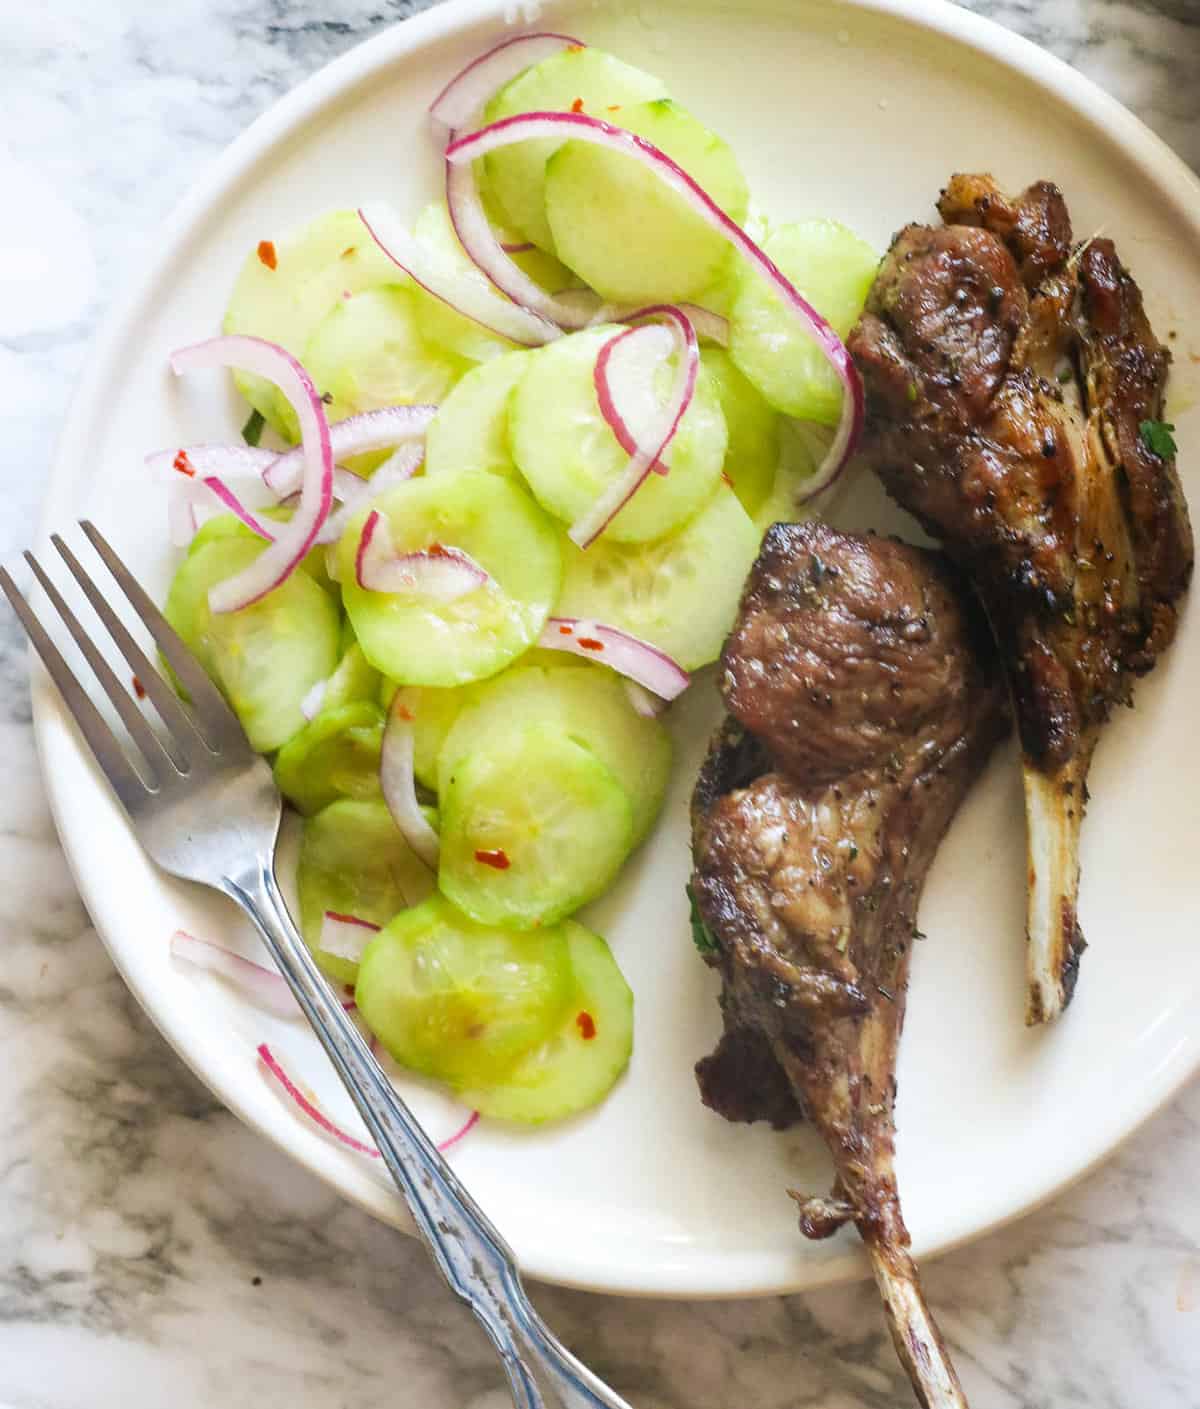 Serving cucumber and onion salad with grilled lamb chops